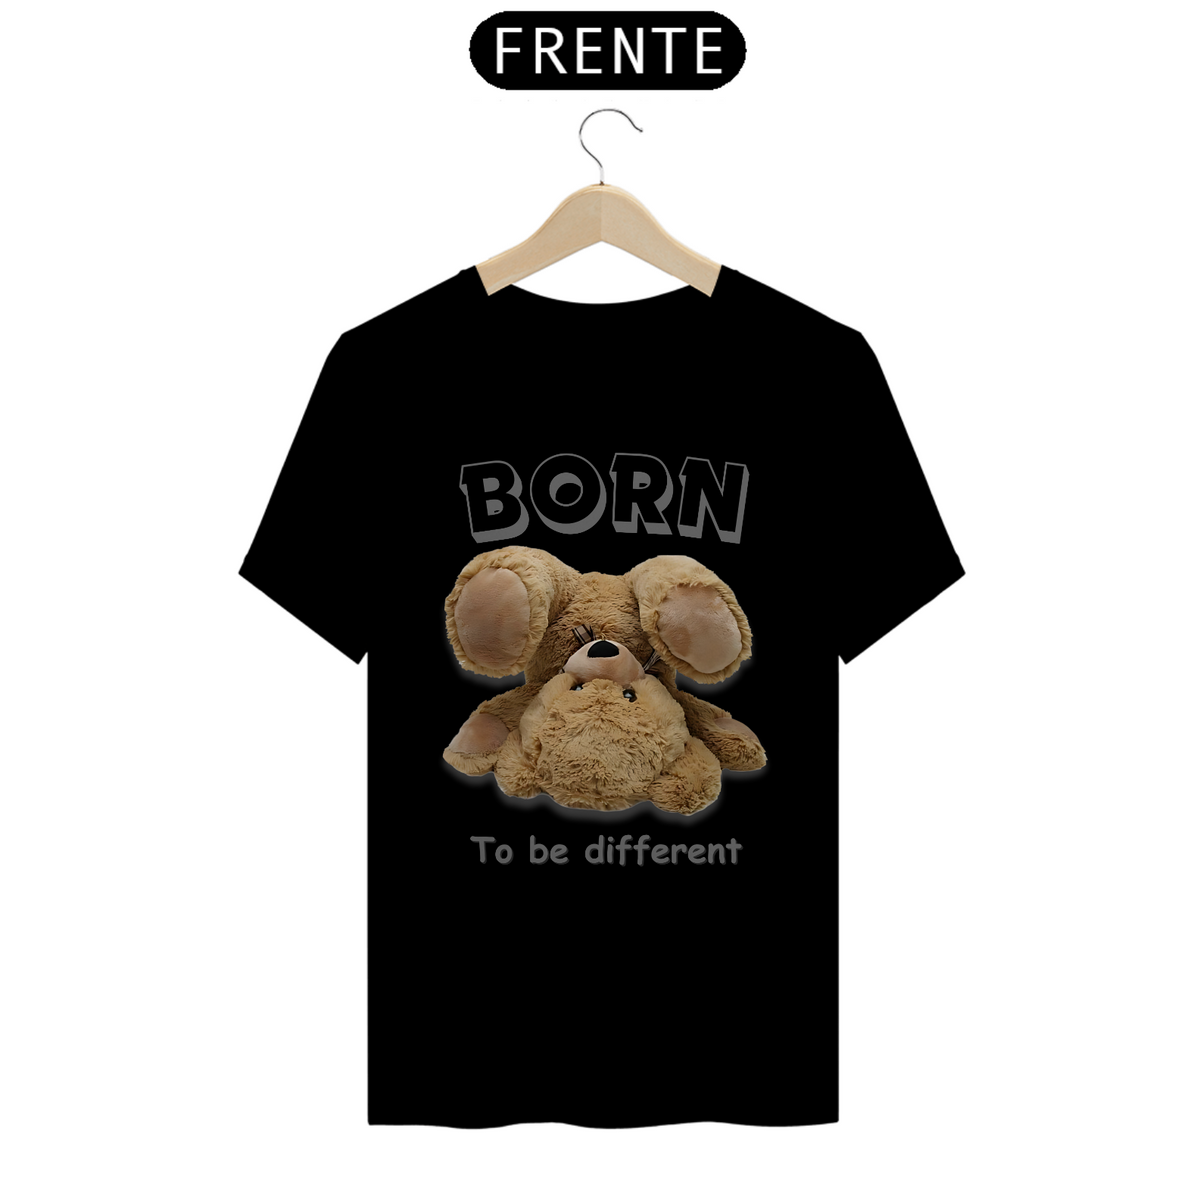 Nome do produto: Teddy Born to be different - Quality